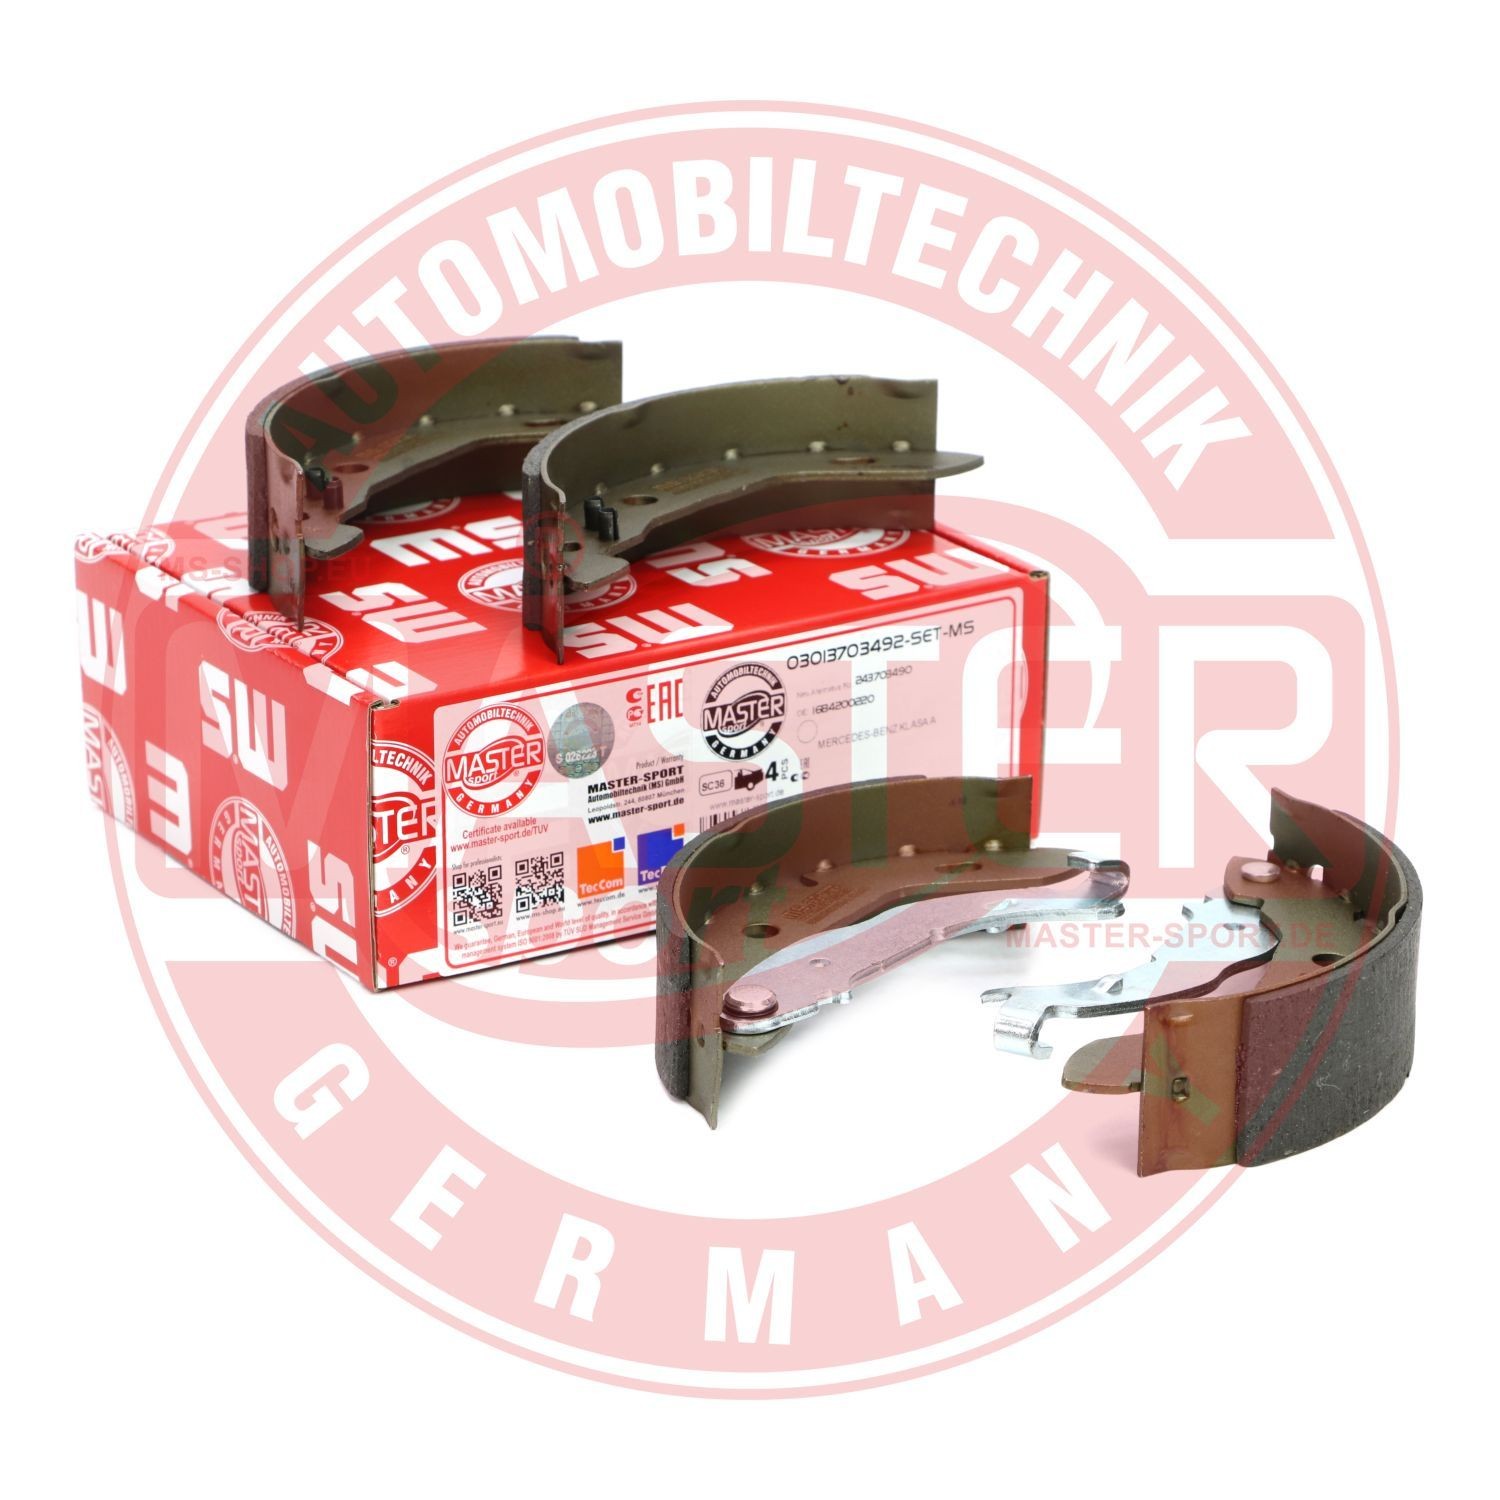 03013703492SETMS Drum brake shoes MASTER-SPORT AB243703490 review and test